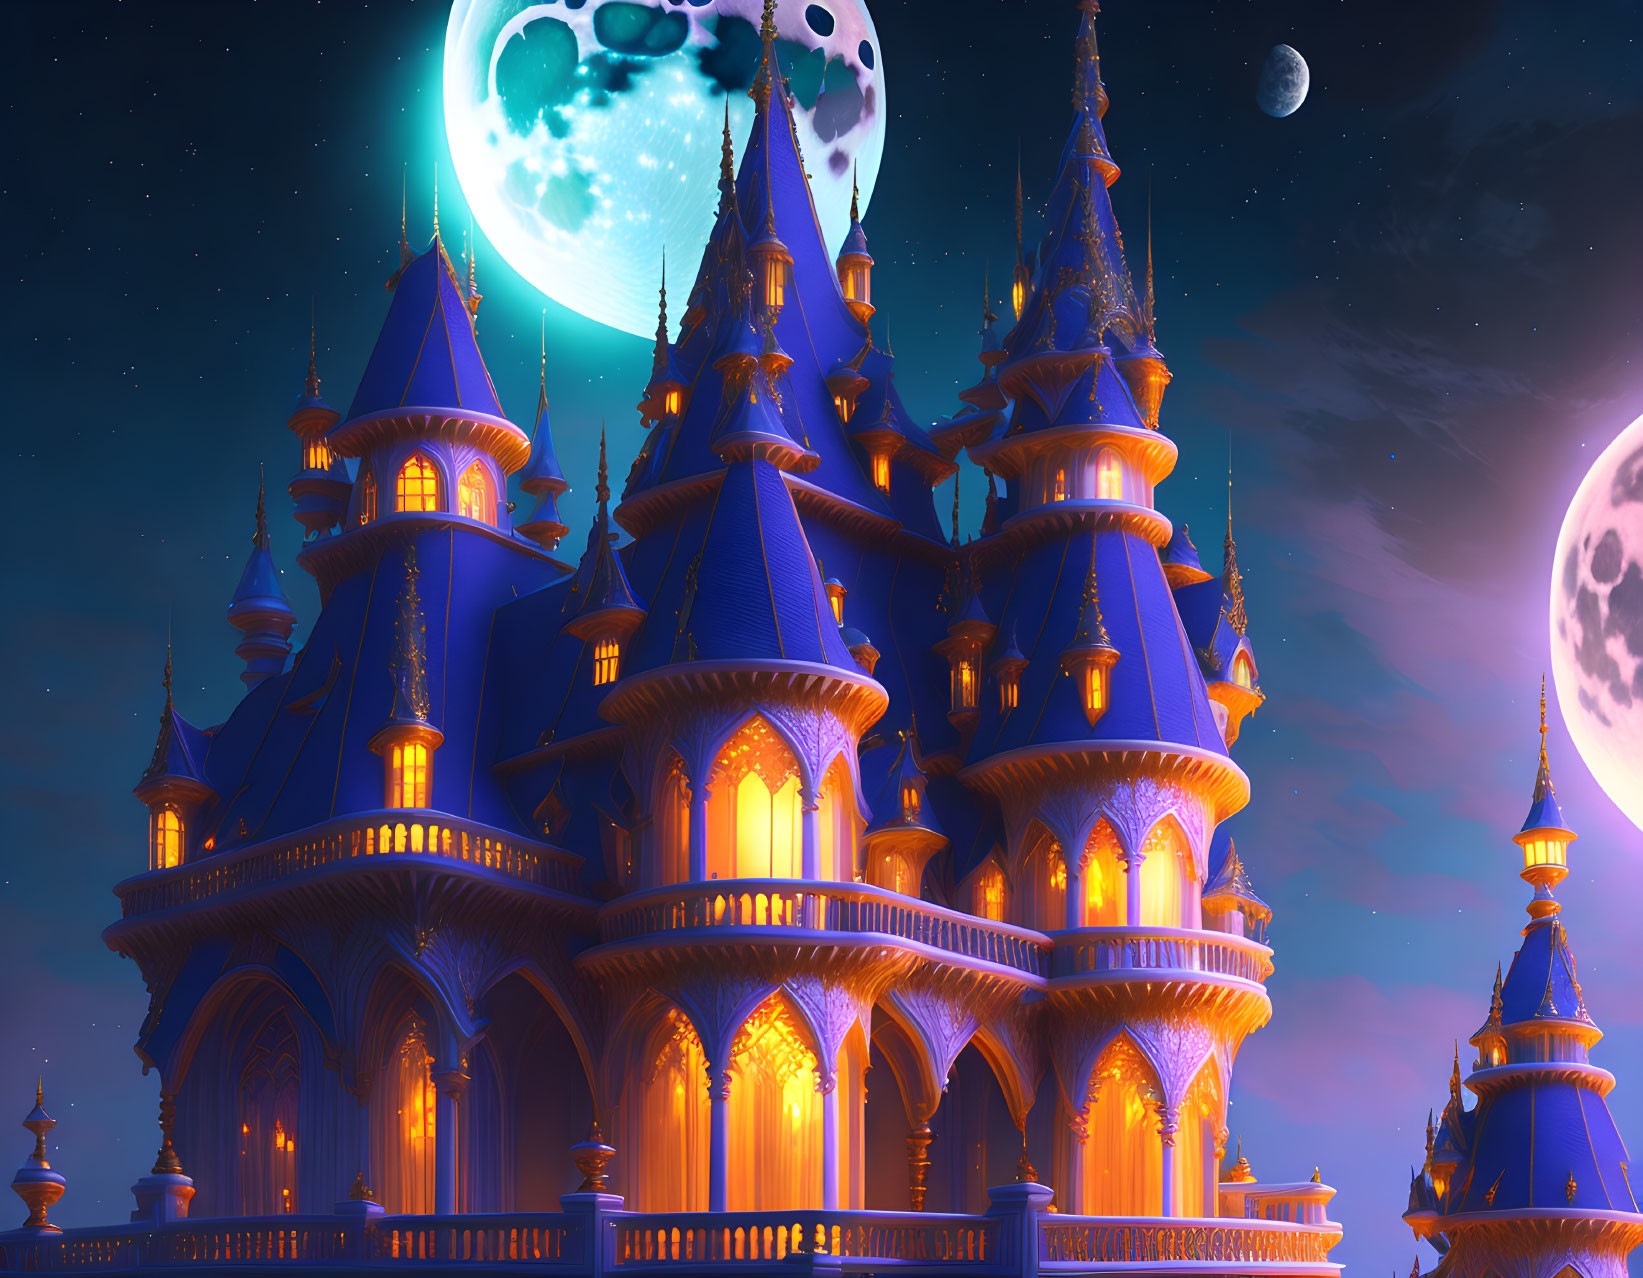 Majestic castle at night with glowing windows and dual moons